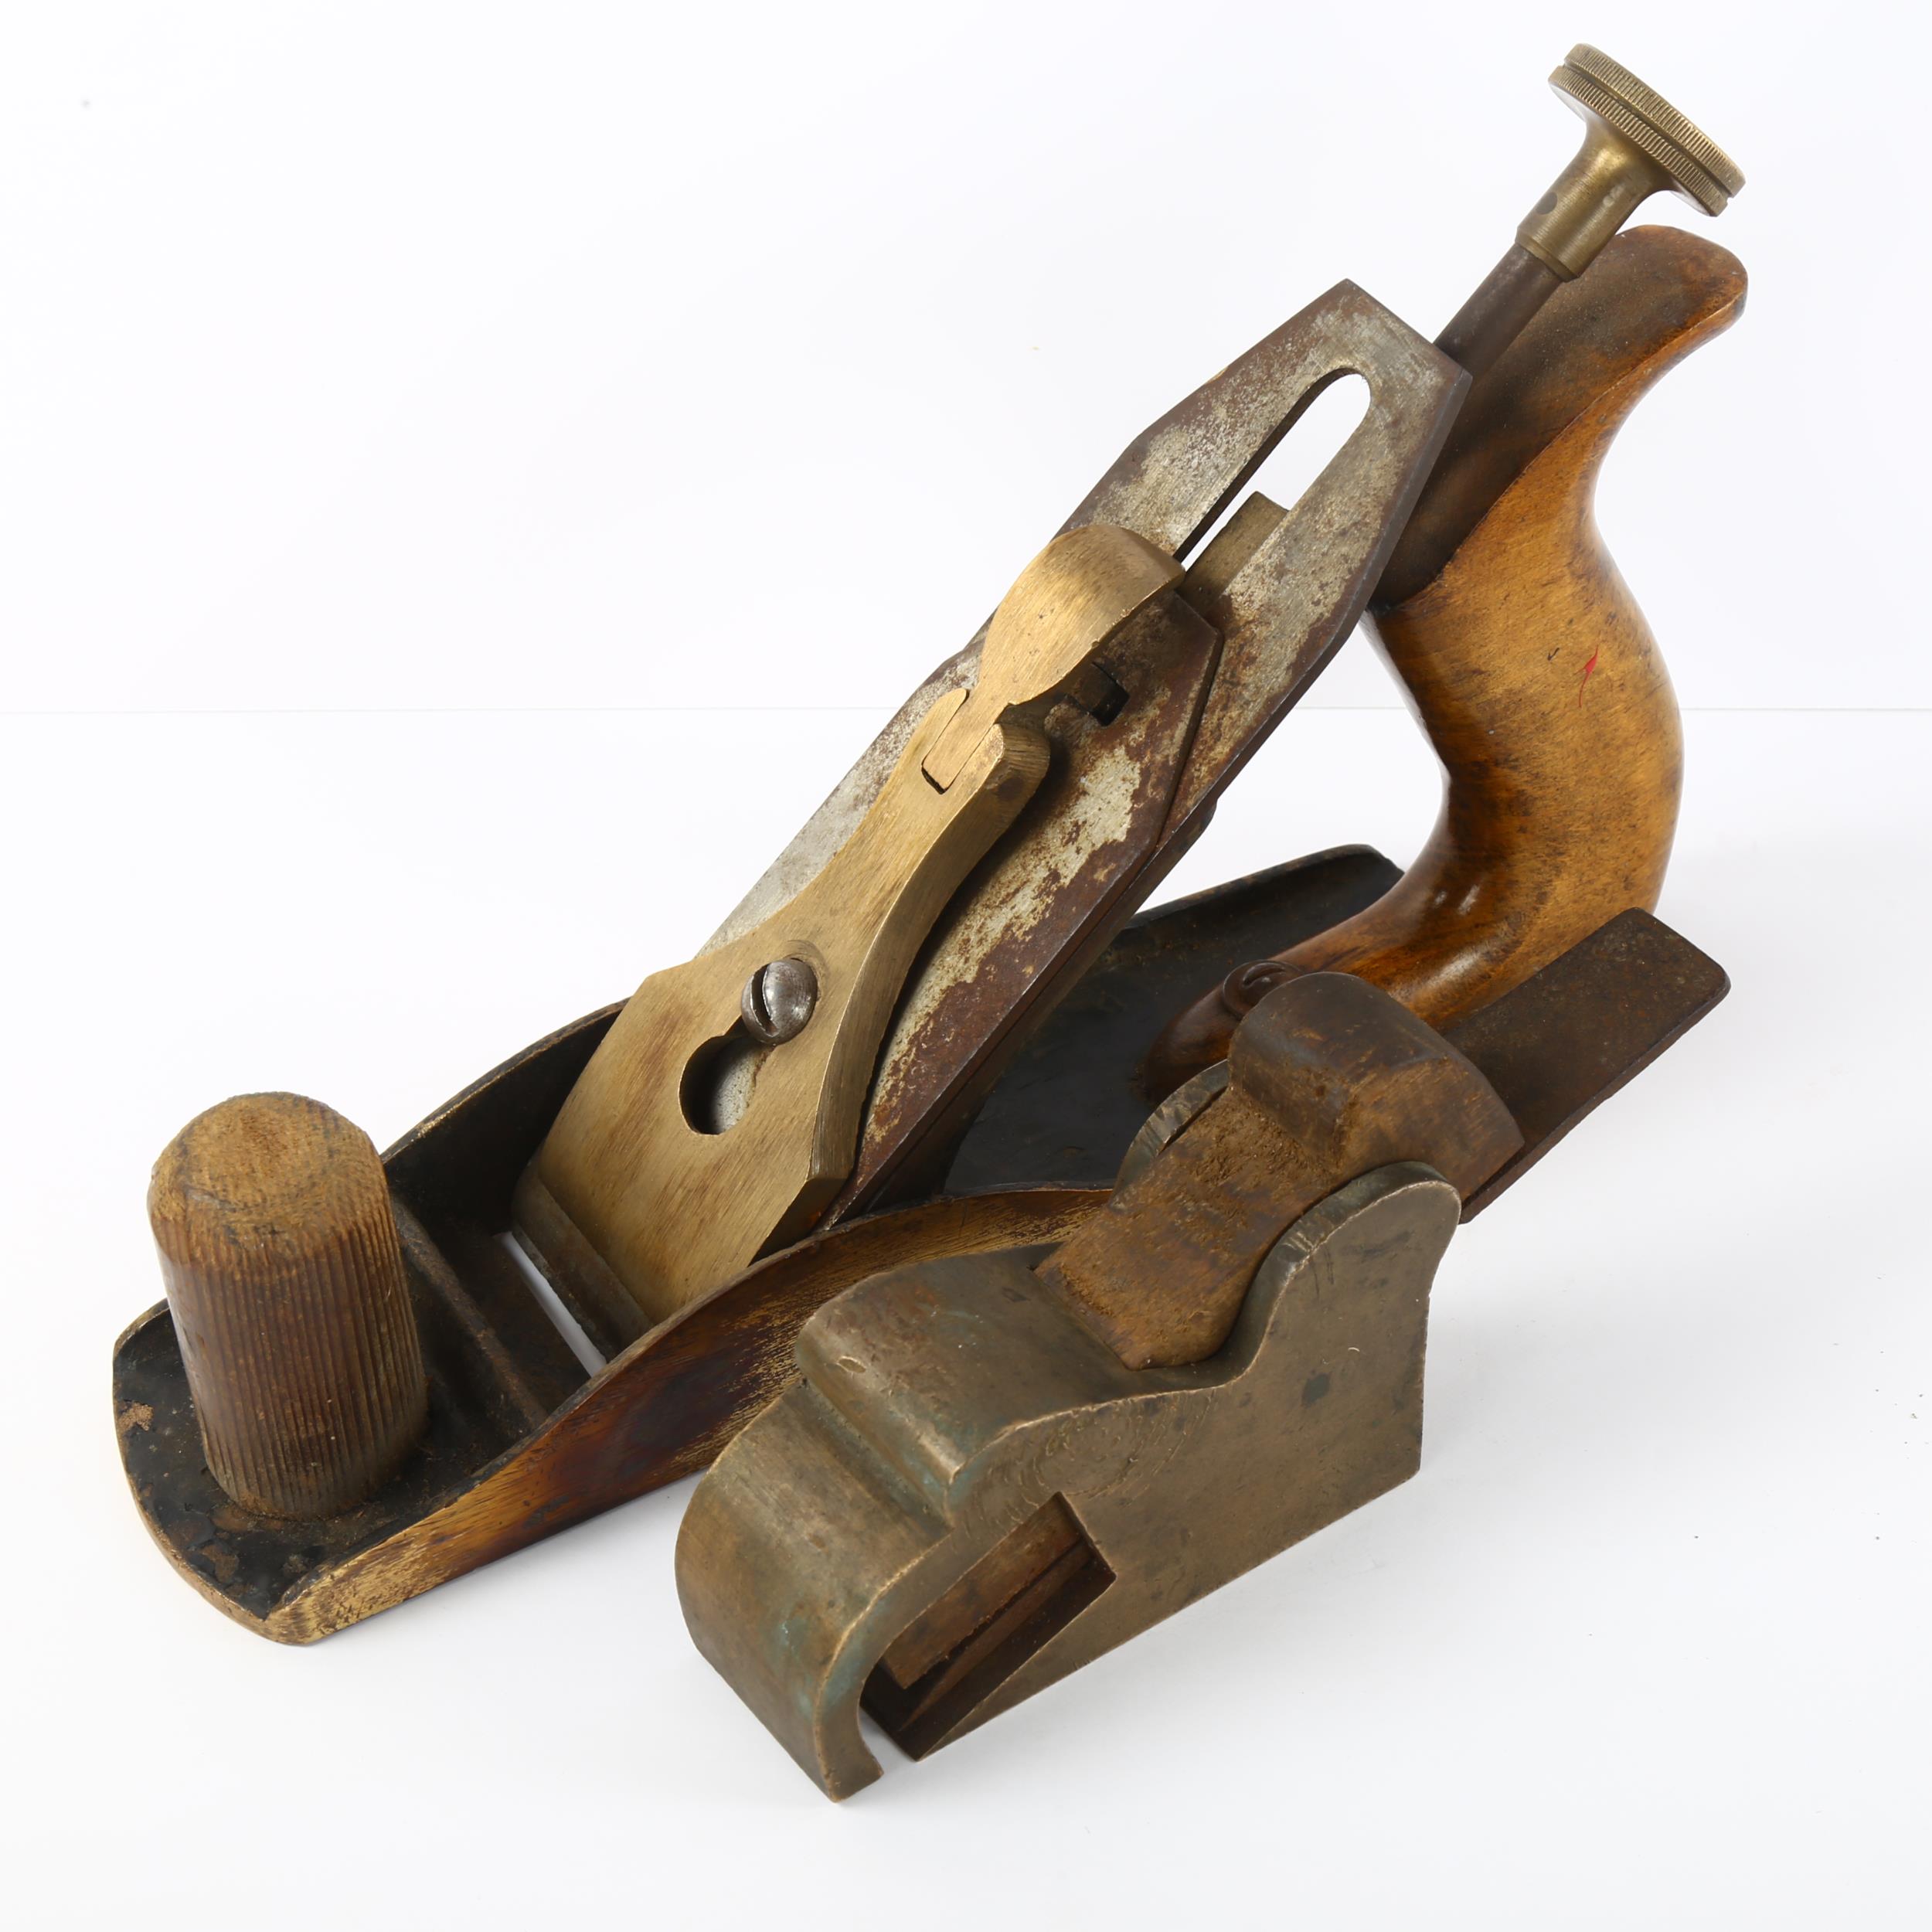 A bronze-based 19th century smoothing plane, a bronze bull nosed plane and 5 folding rules, no - Image 2 of 3